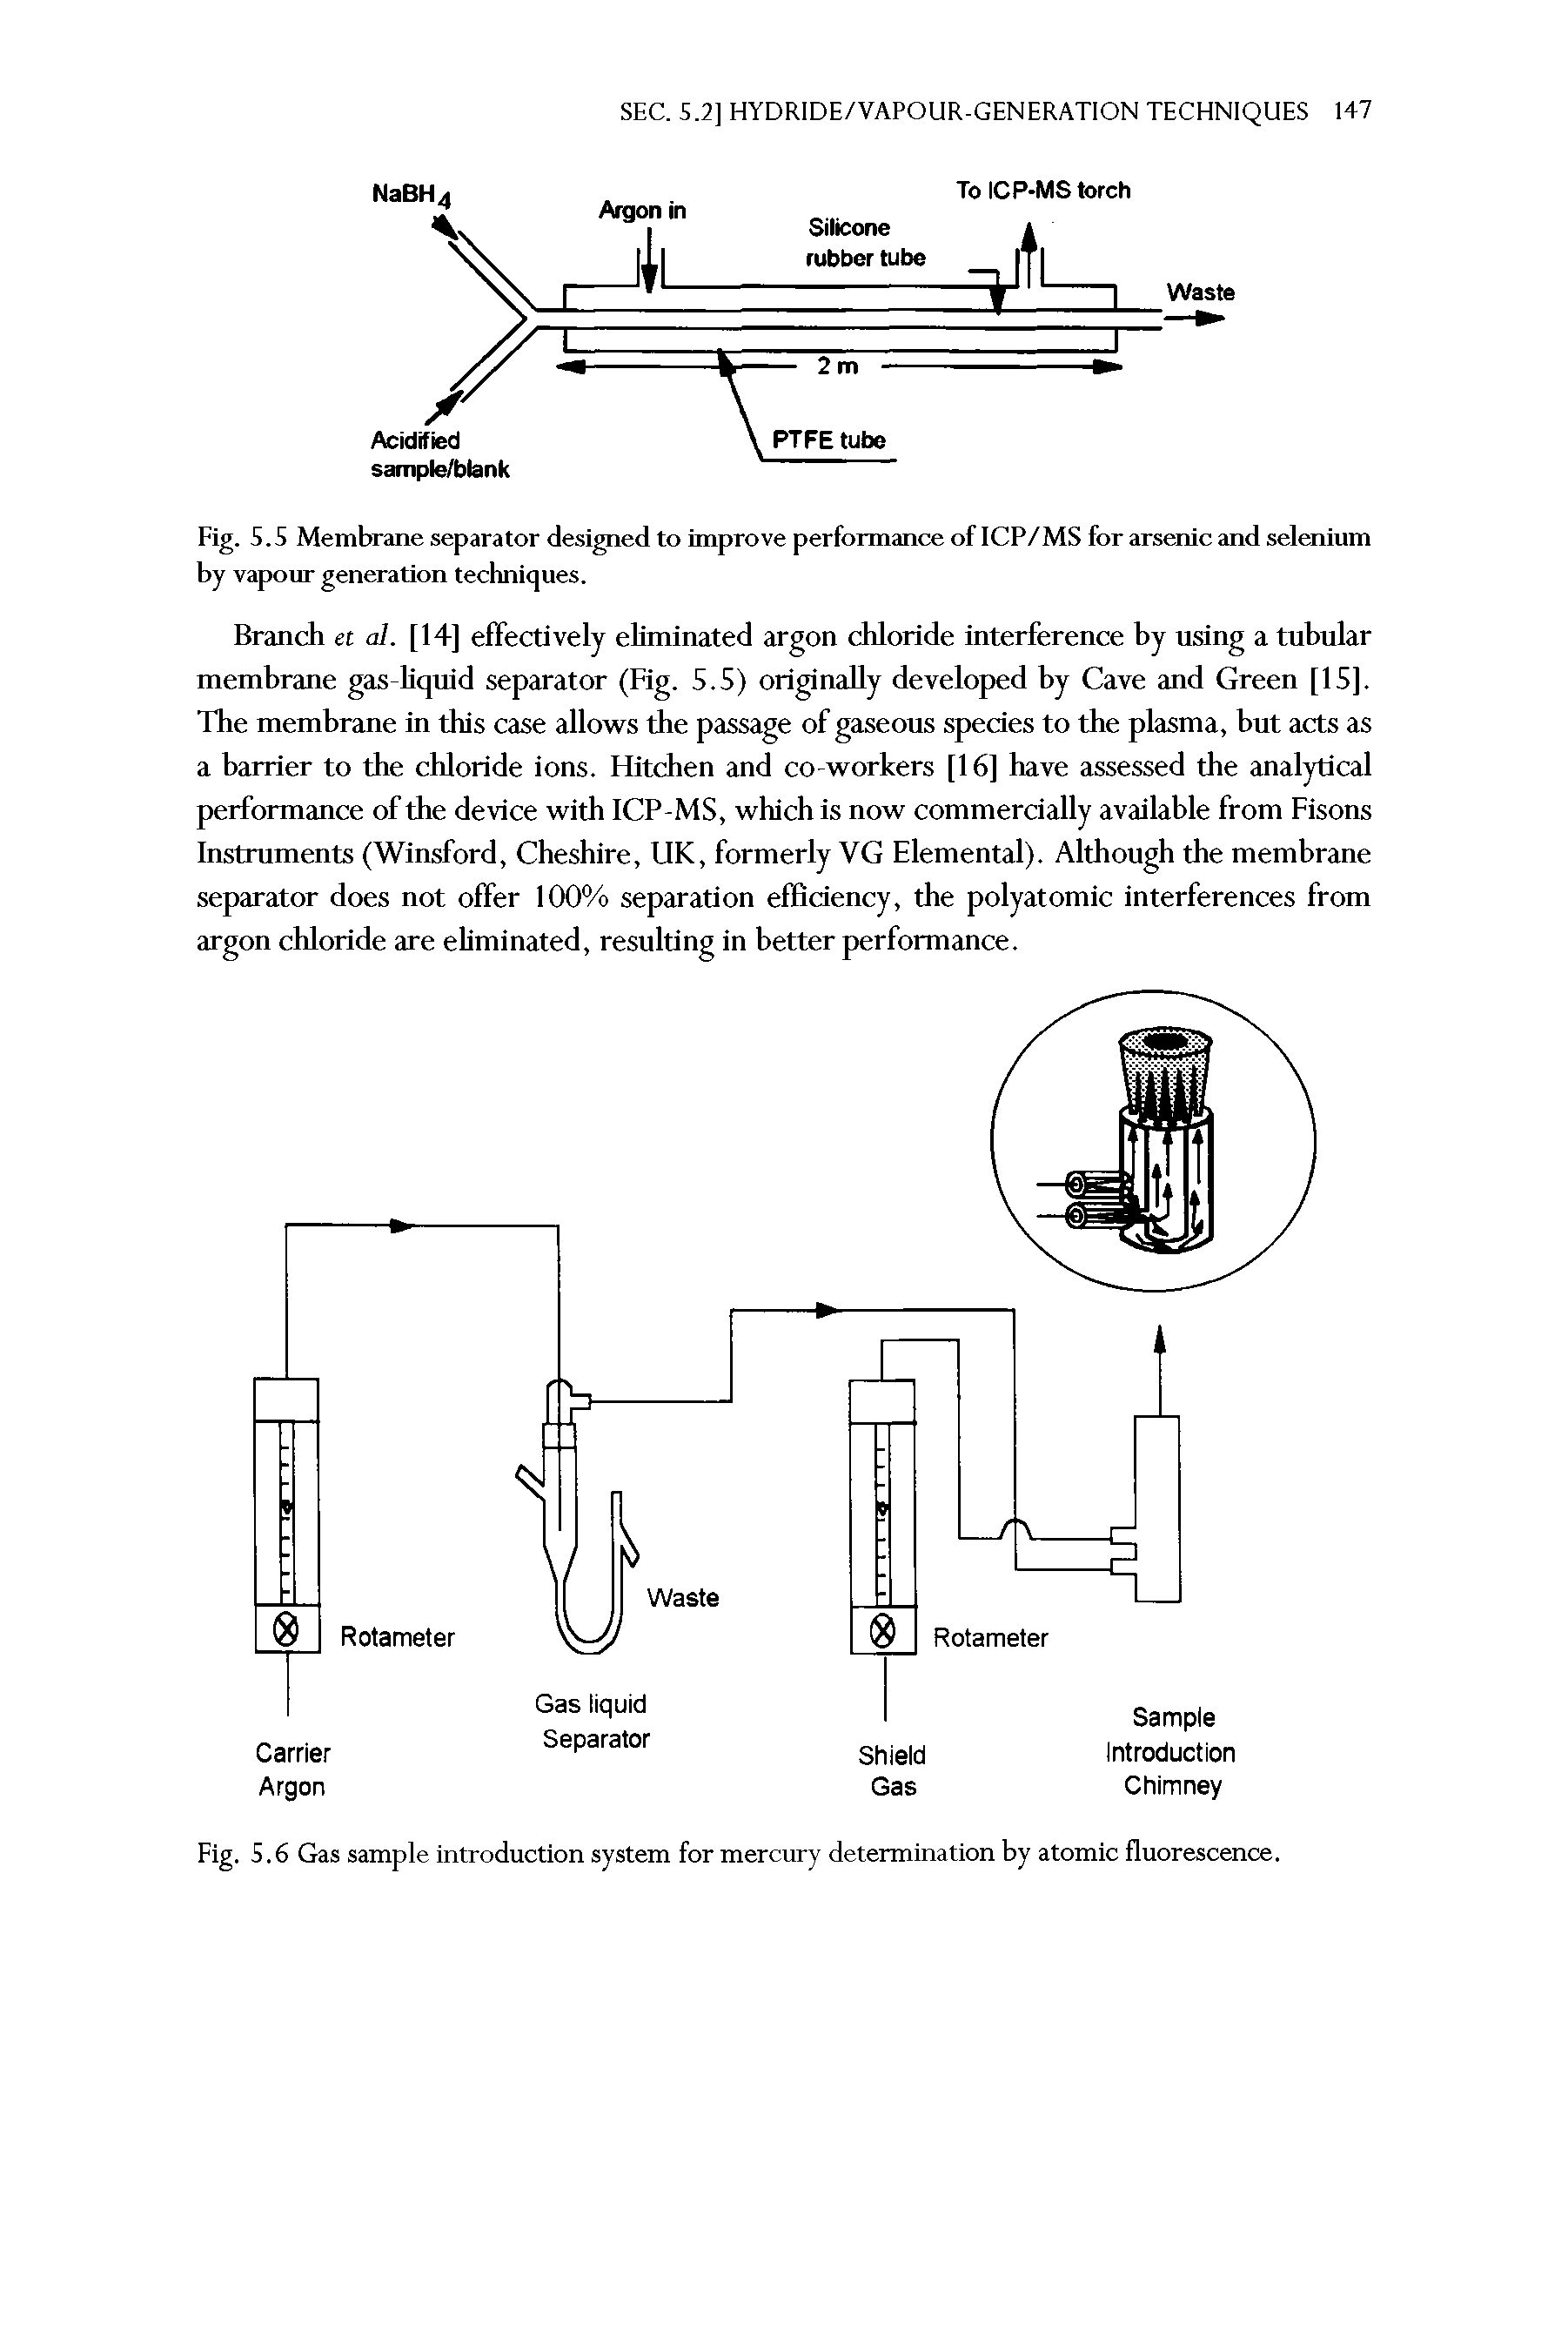 Fig. S. S Membrane separator designed to improve performance of ICP/MS for arsenic and selenium by vapour generation techniques.